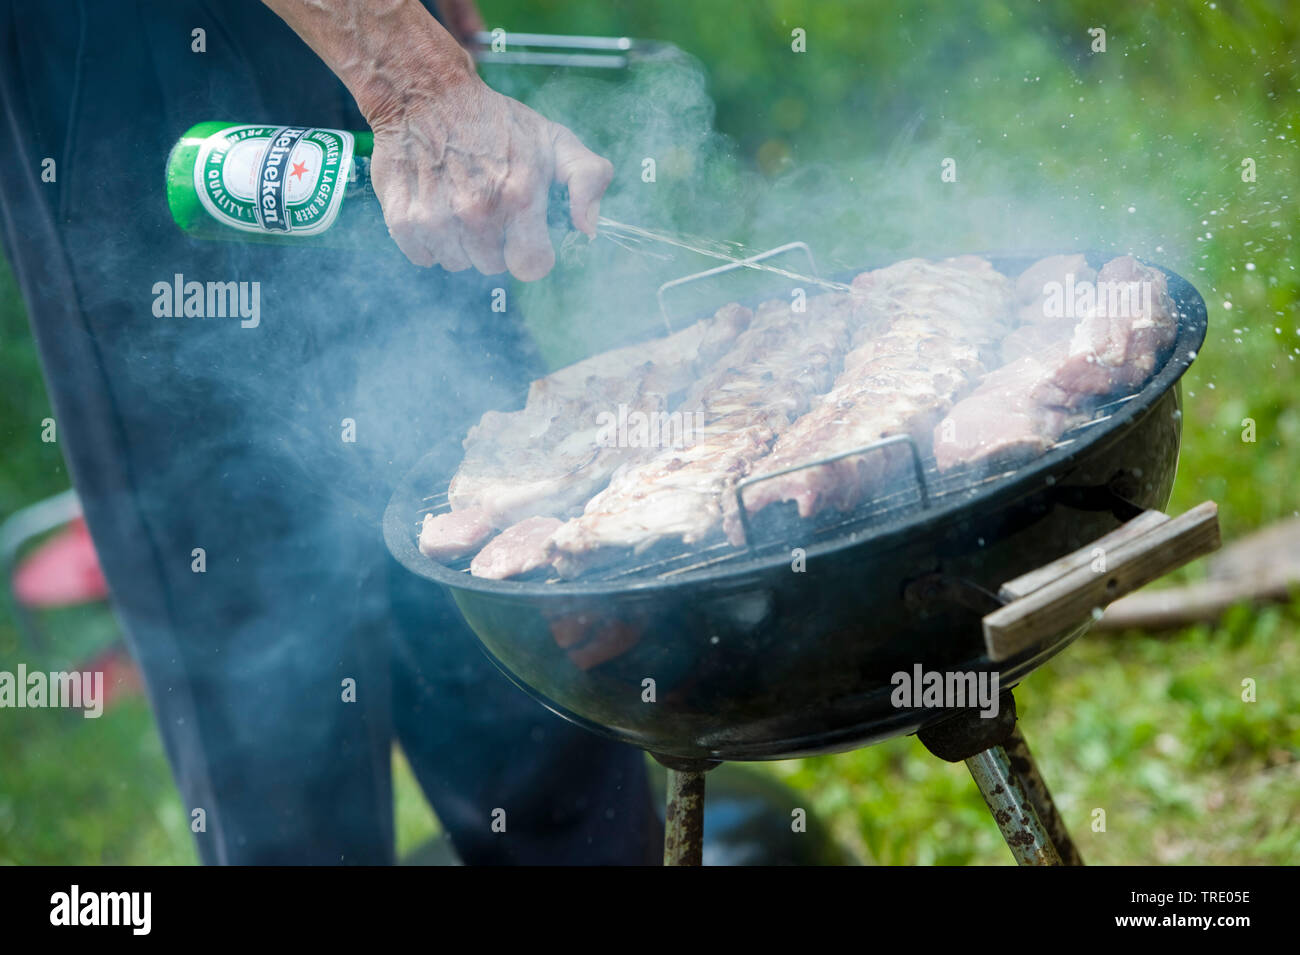 Meat on a charcoal barbecue deglazing with beer Stock Photo